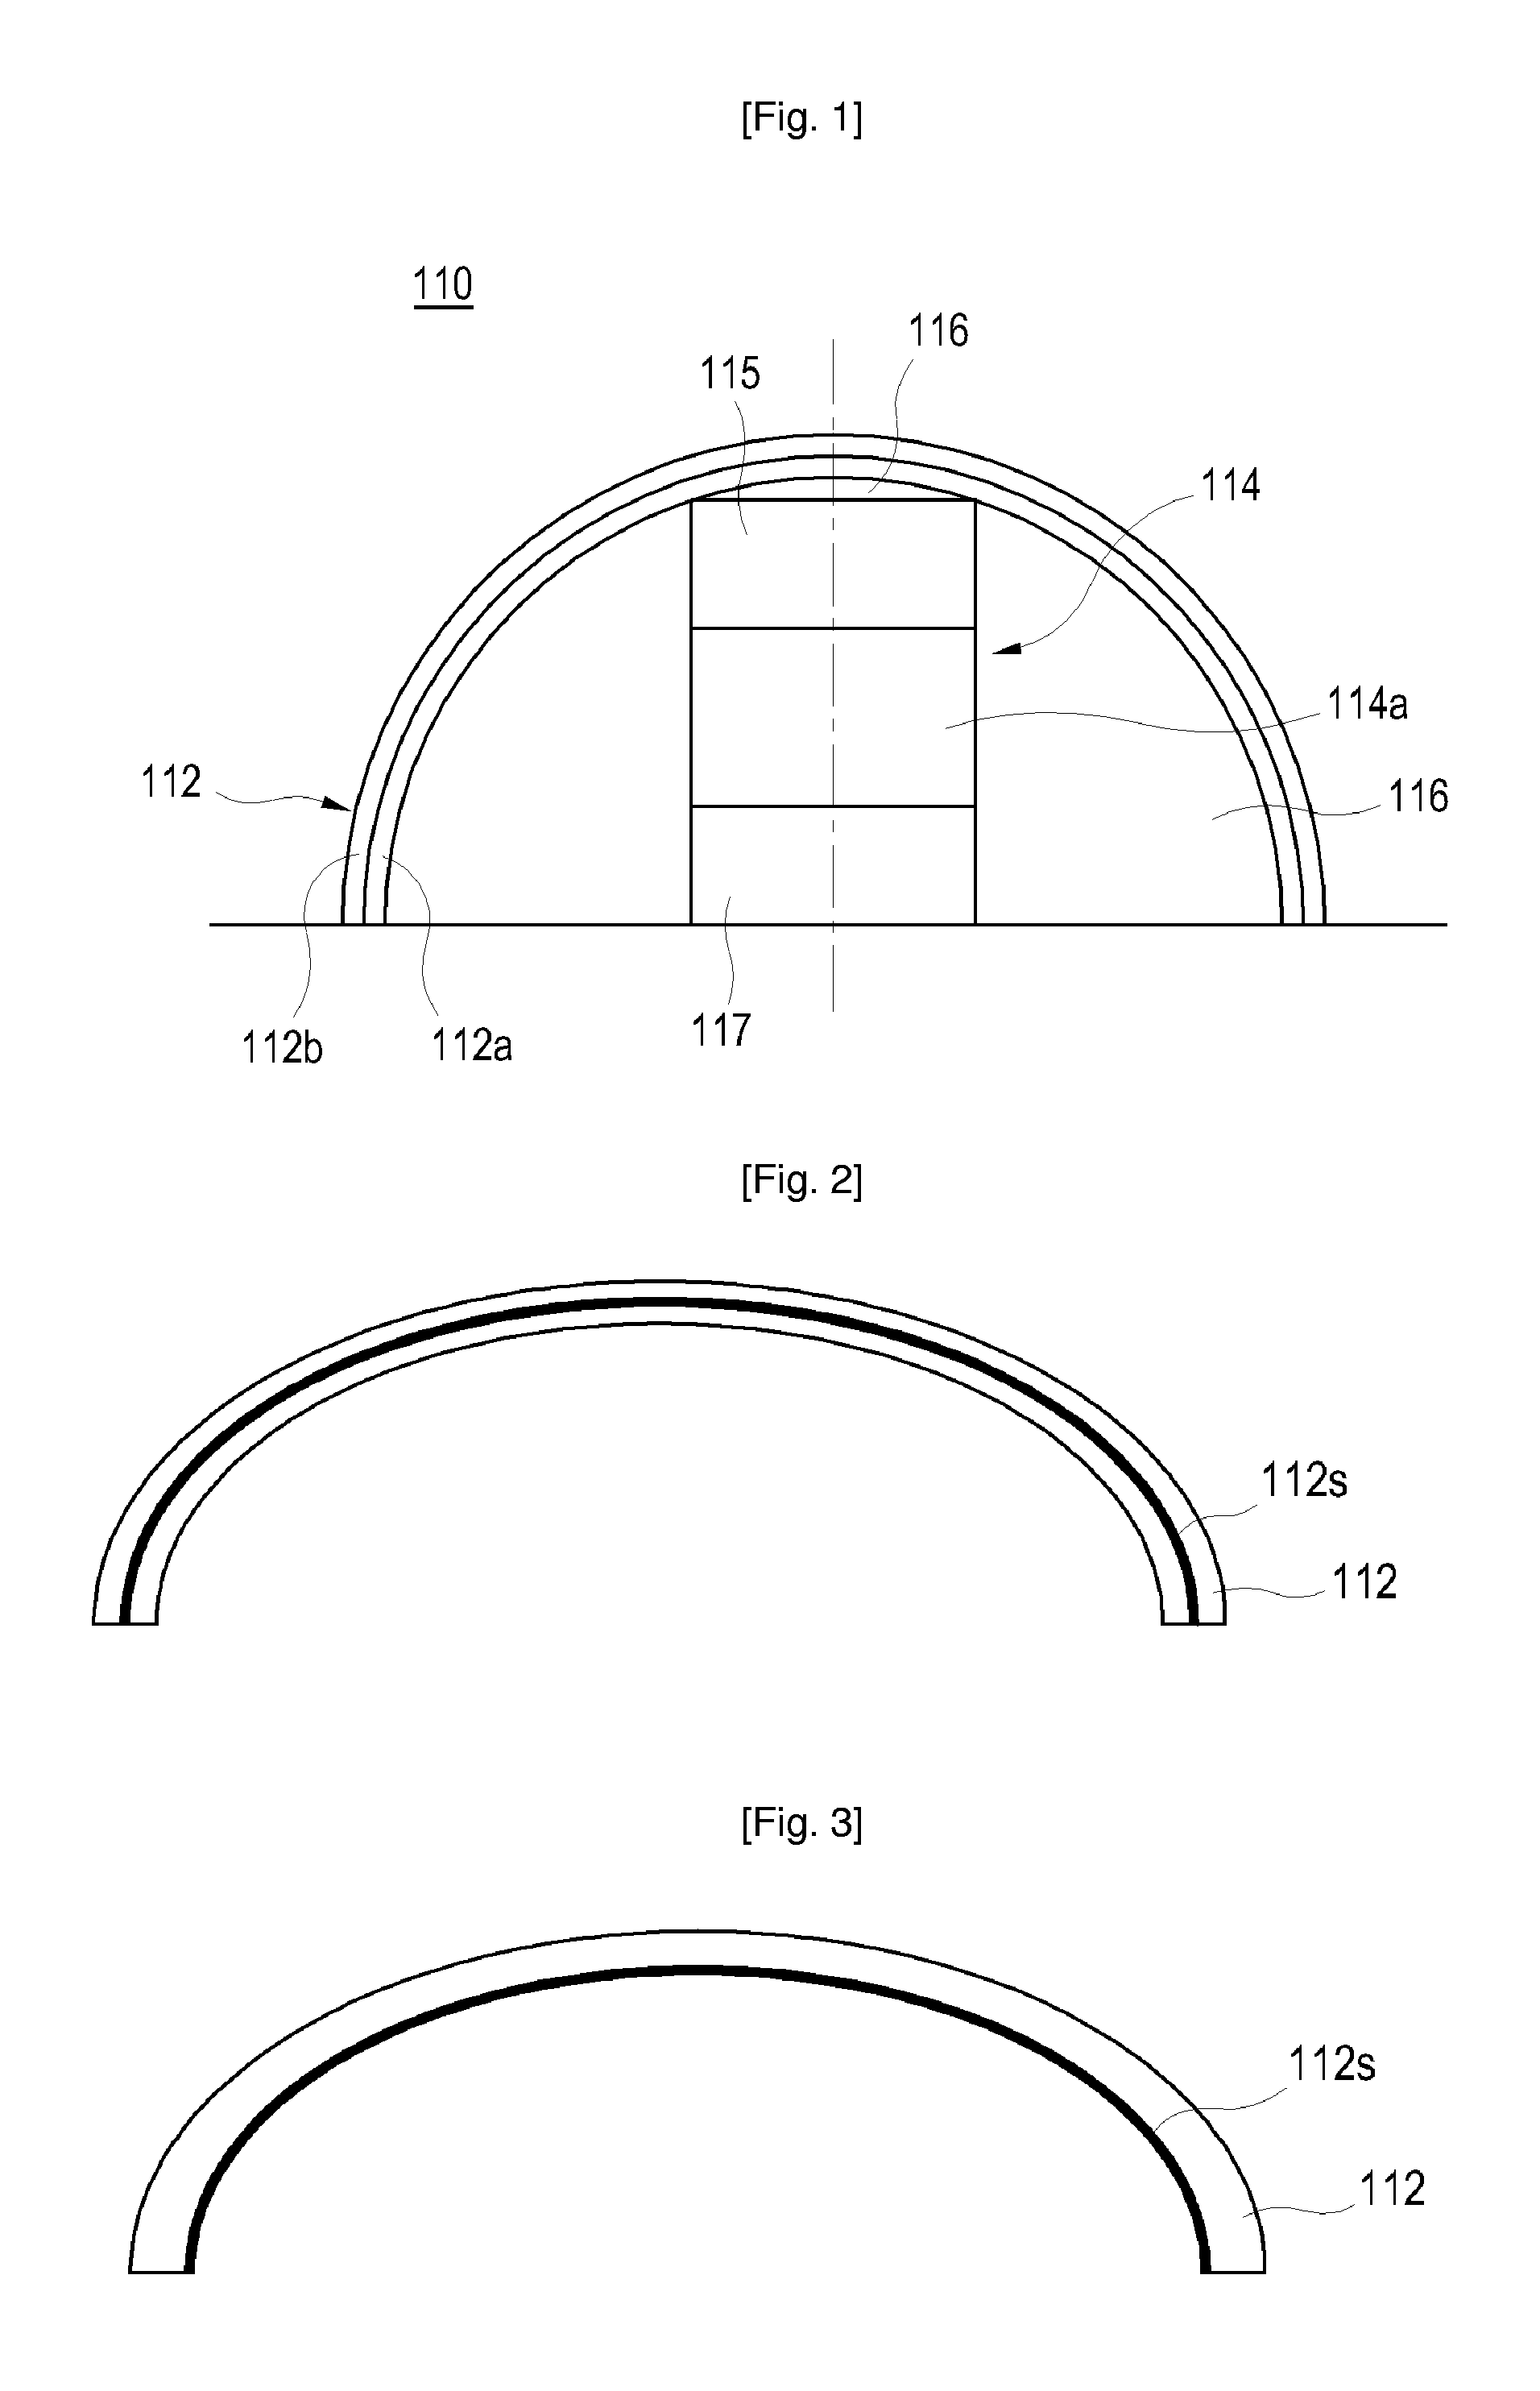 Probe for Ultrasound Diagnosis and Ultrasound Diagnostic System Using the Same